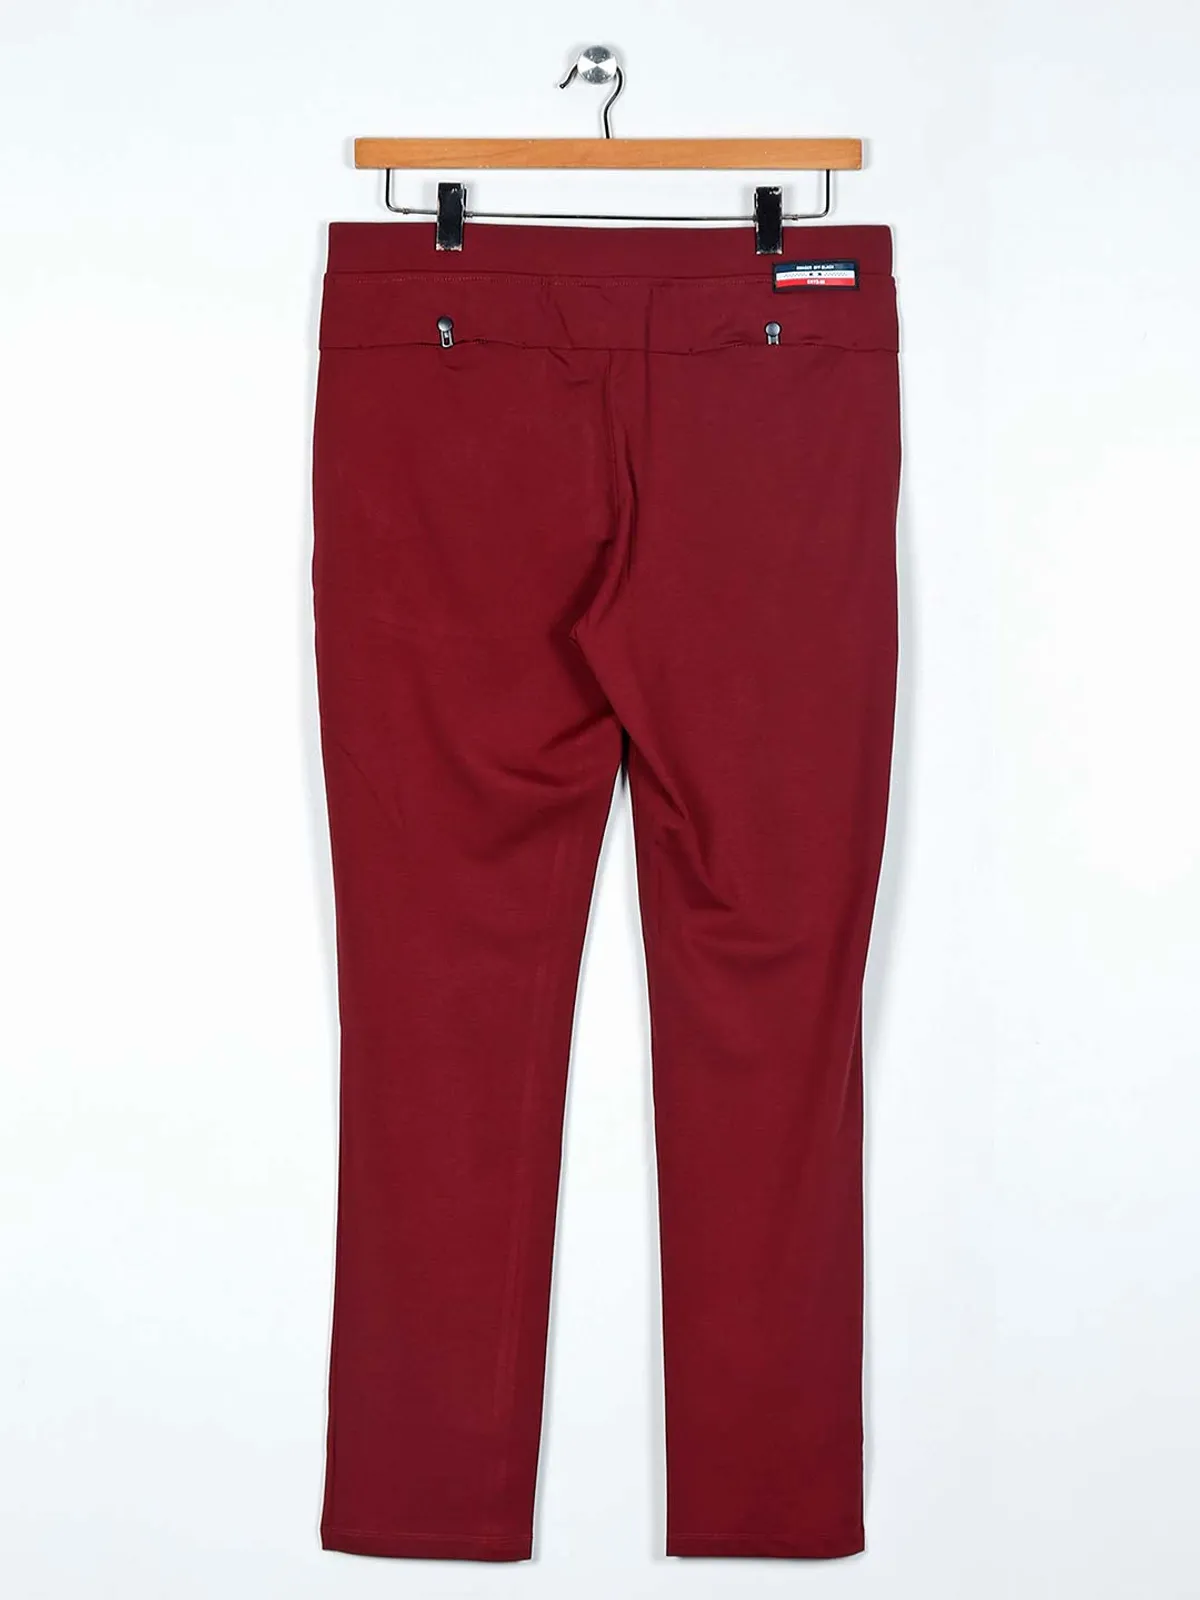 Cookyss maroon slim fit cotton track pant